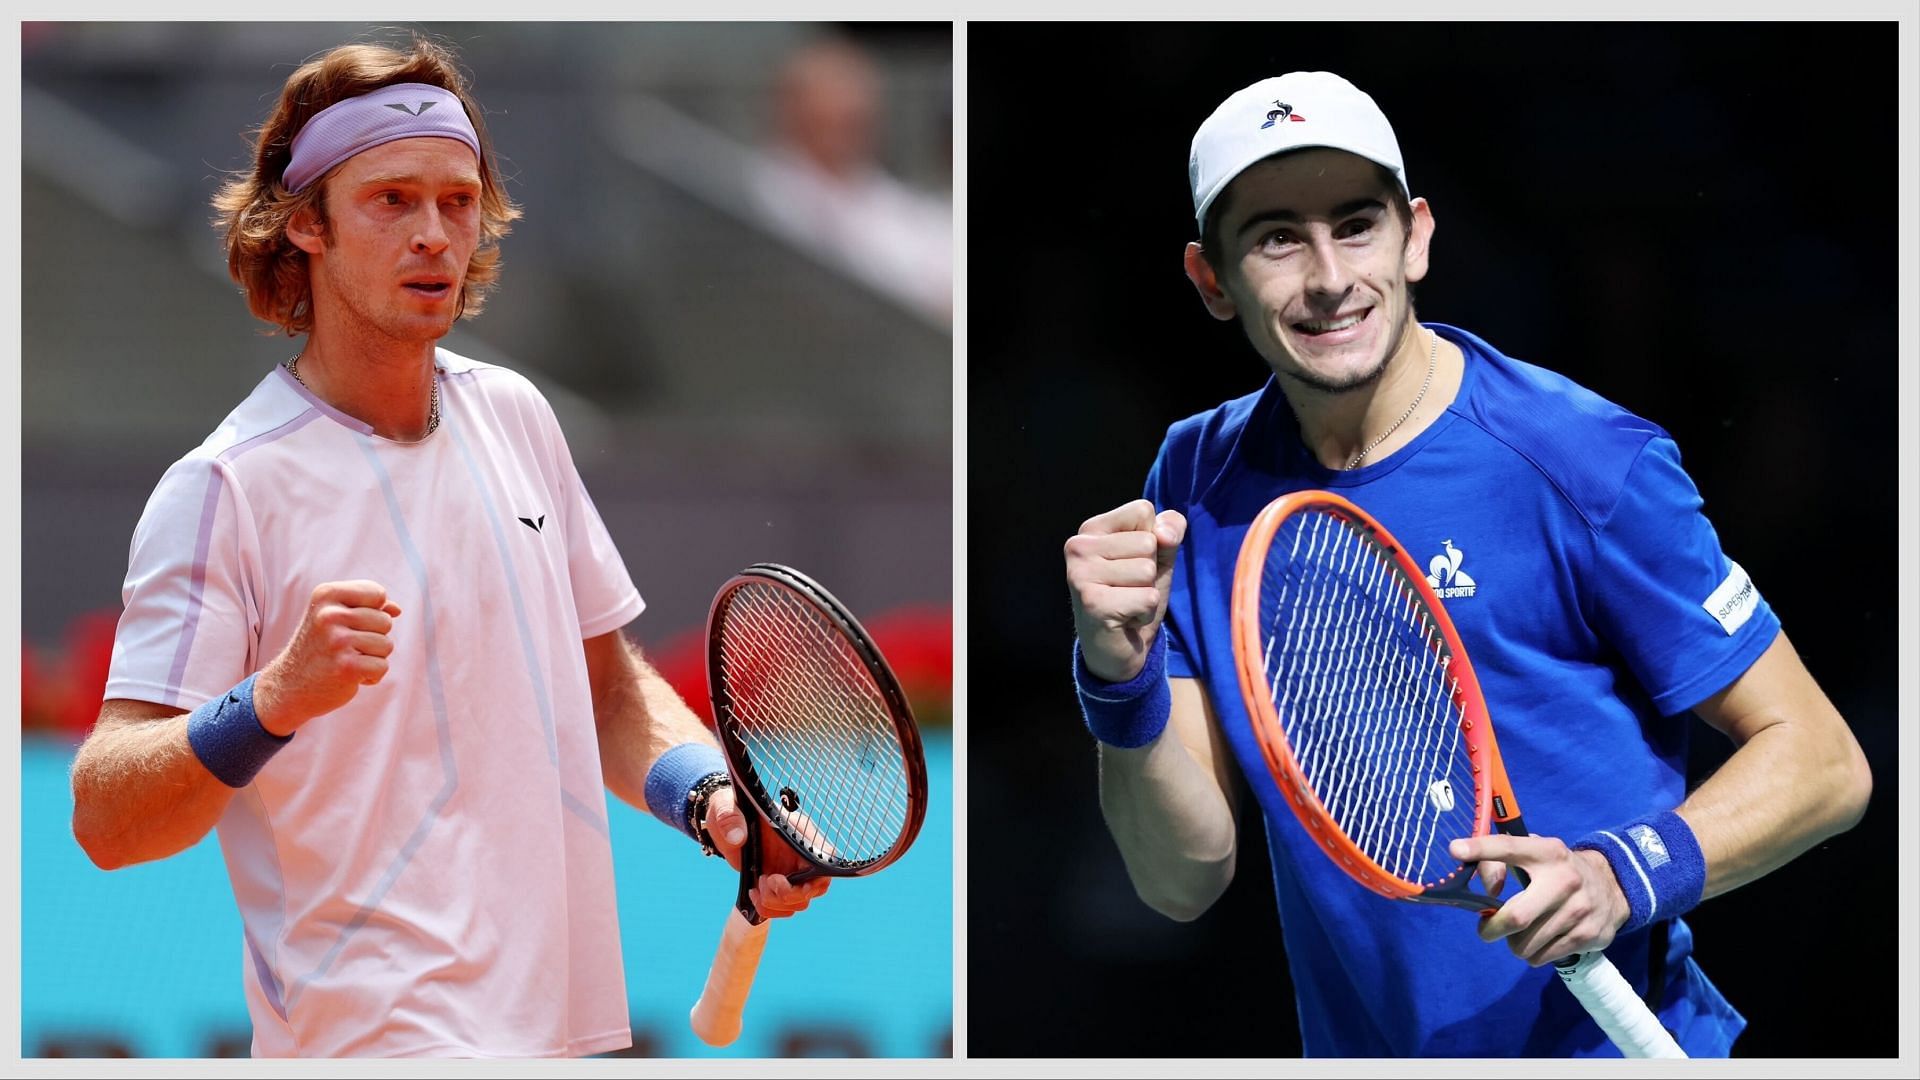 Andrey Rublev vs Matteo Arnaldi is one of the third-round matches at the French Open